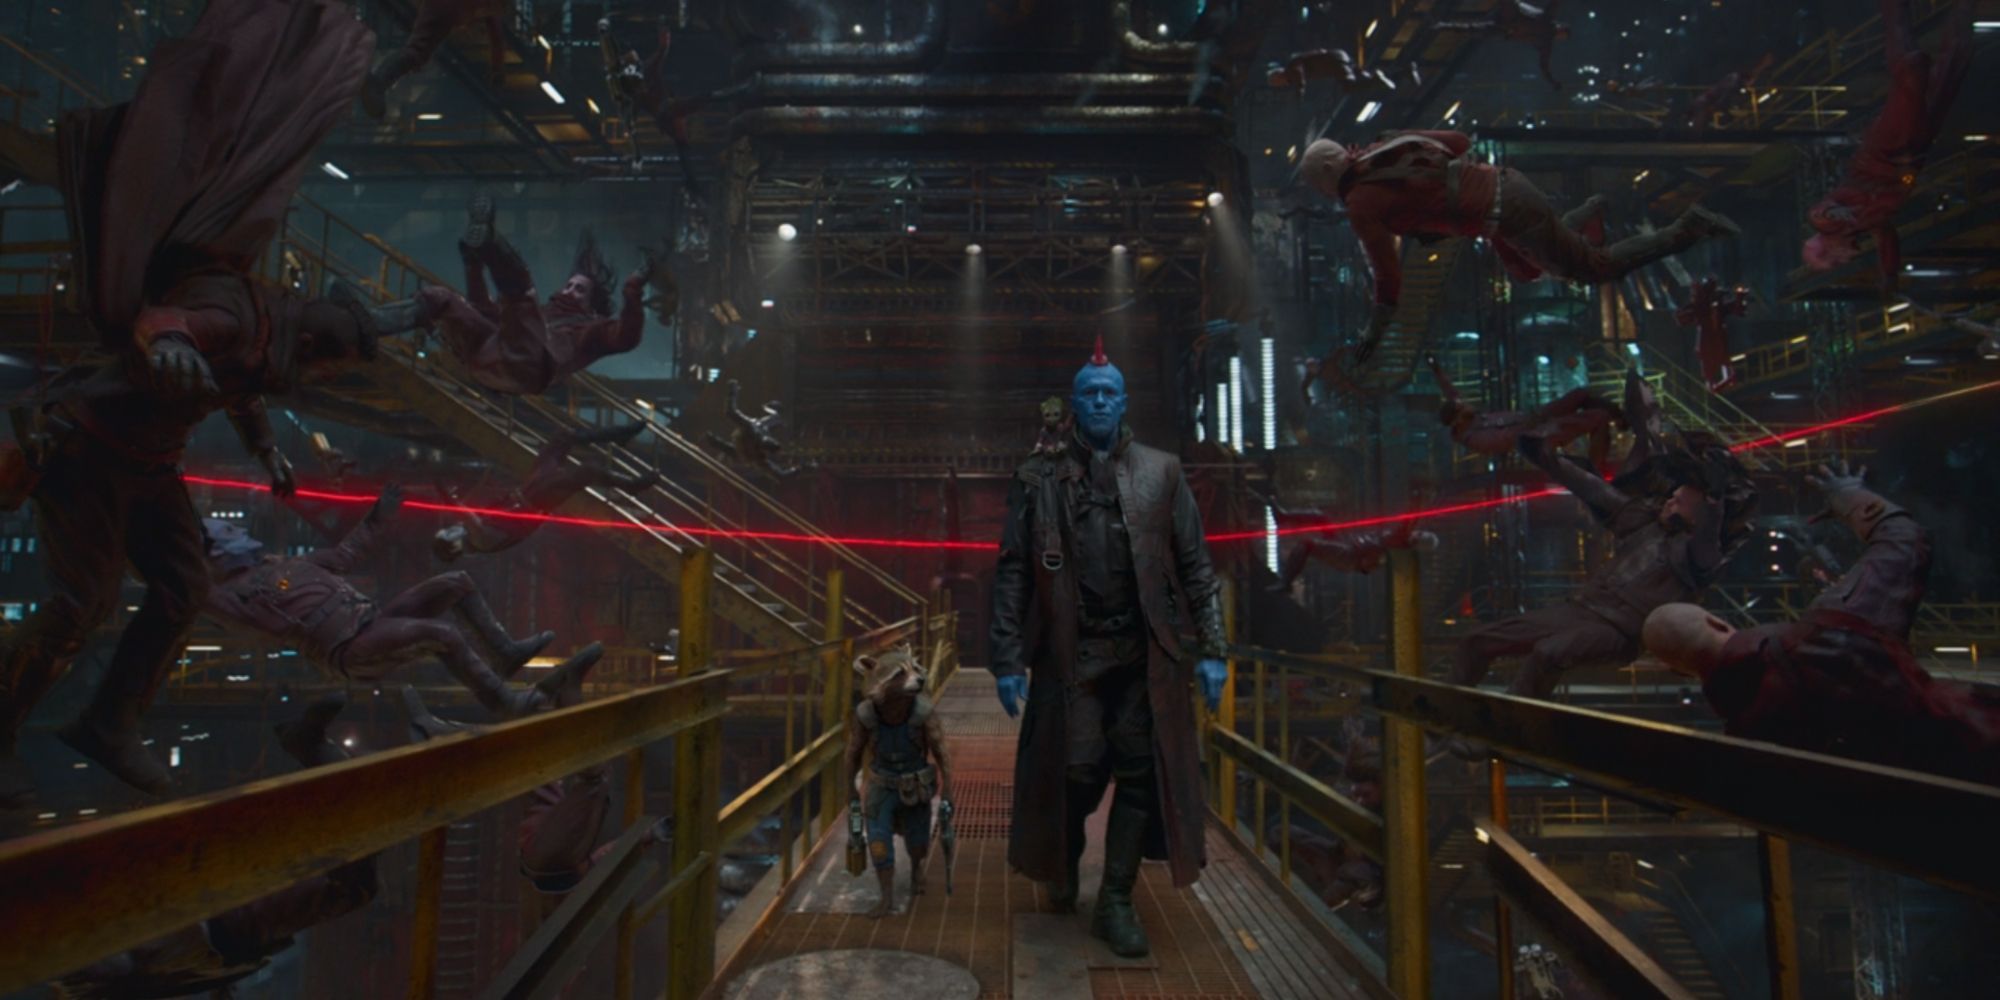 Yondu slaughtering the Ravagers with the Super Yaka arrow in Guardians Of The Galaxy Vol. 2